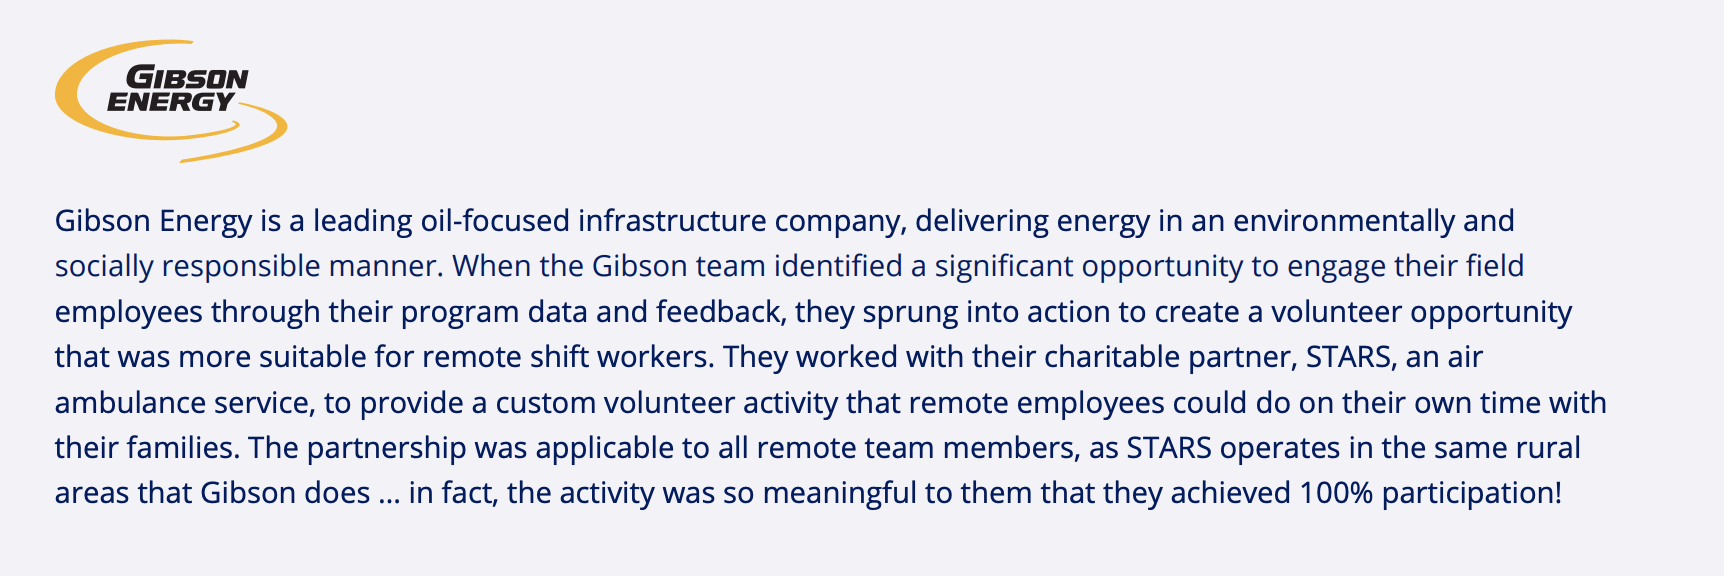 Gibson_energy.png